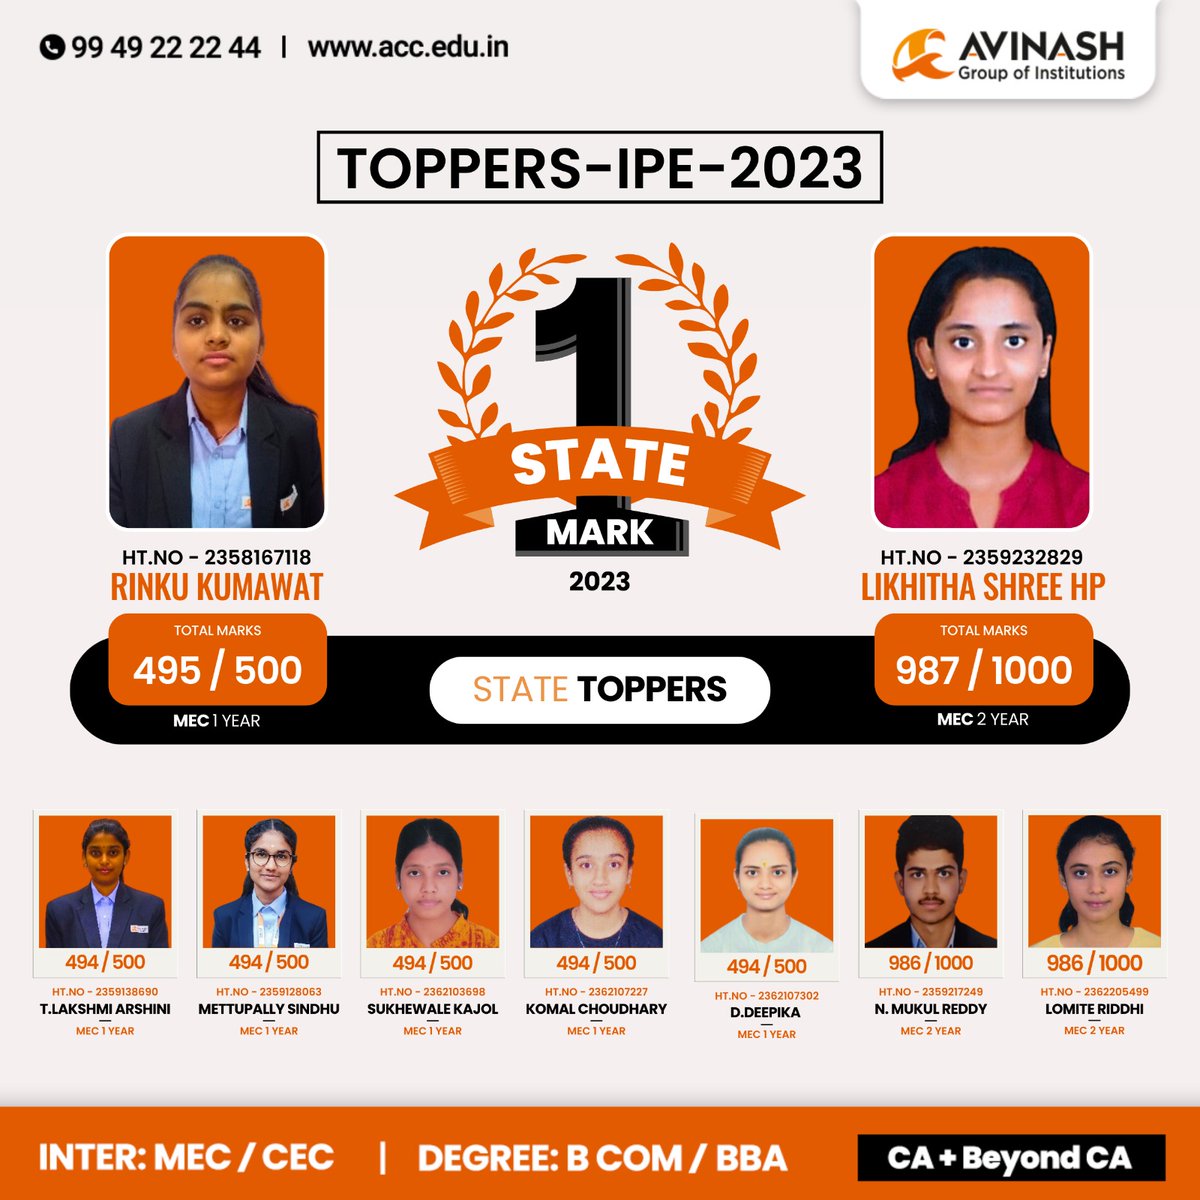 Students of Avinash Group of Institution have Achieved an remarkable Scores in IPE 2023. We are Celebrating the success of our Bright students who secured top positions.
#avinashgroupofinstitutions #GrowWithAvinash #placement #statetoppers #toppers #ipe #intermarks